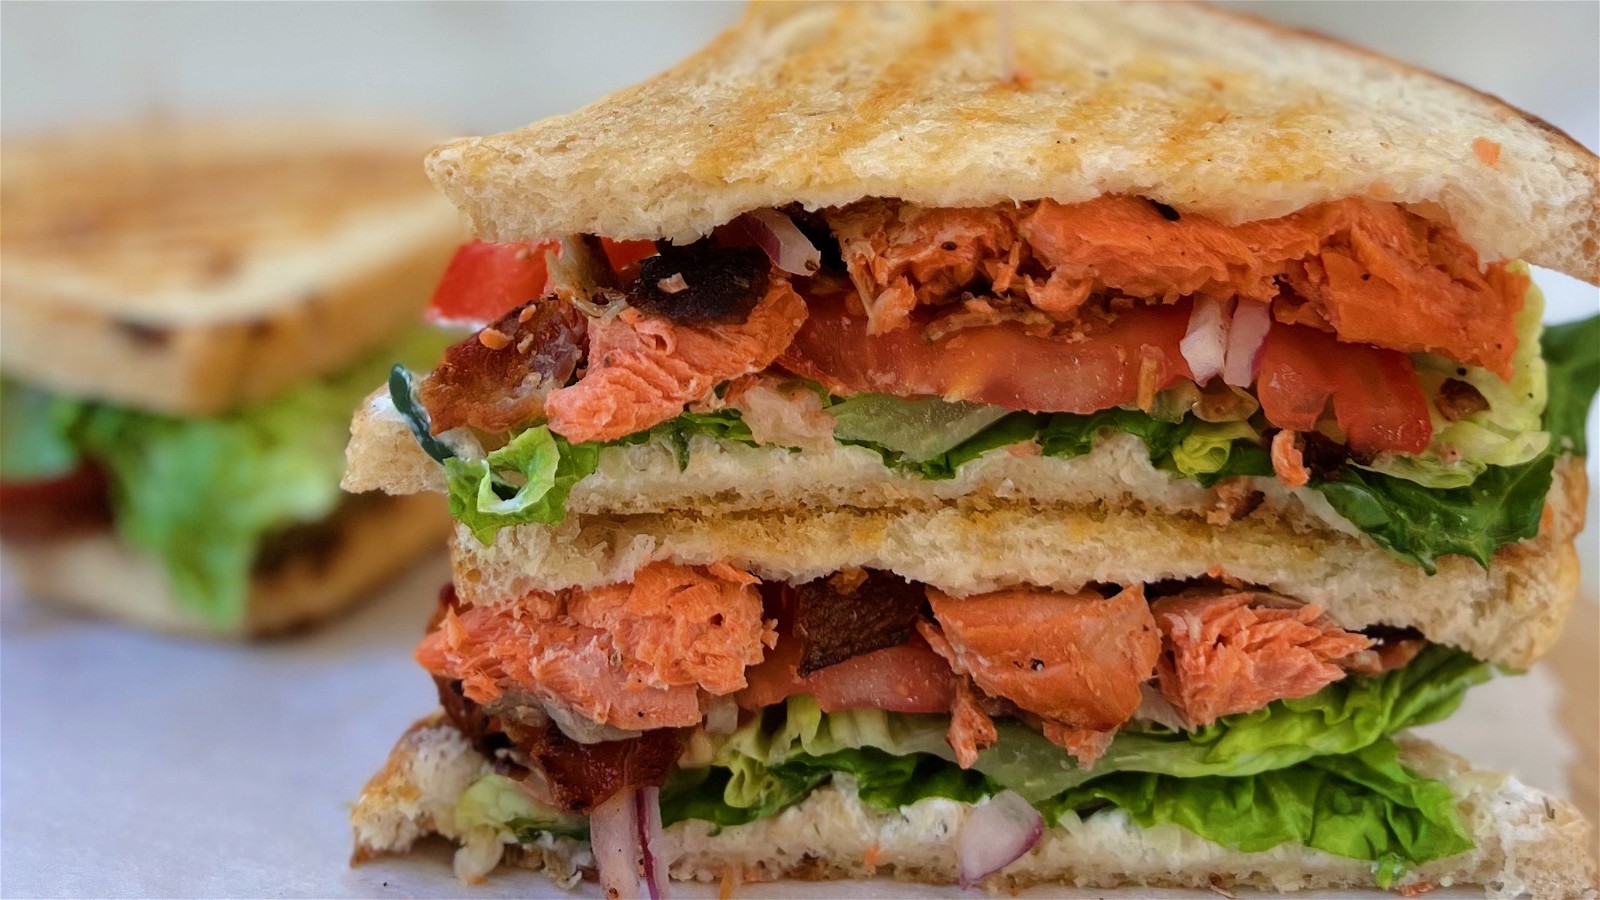 Image of BLT with Grilled Sockeye Salmon